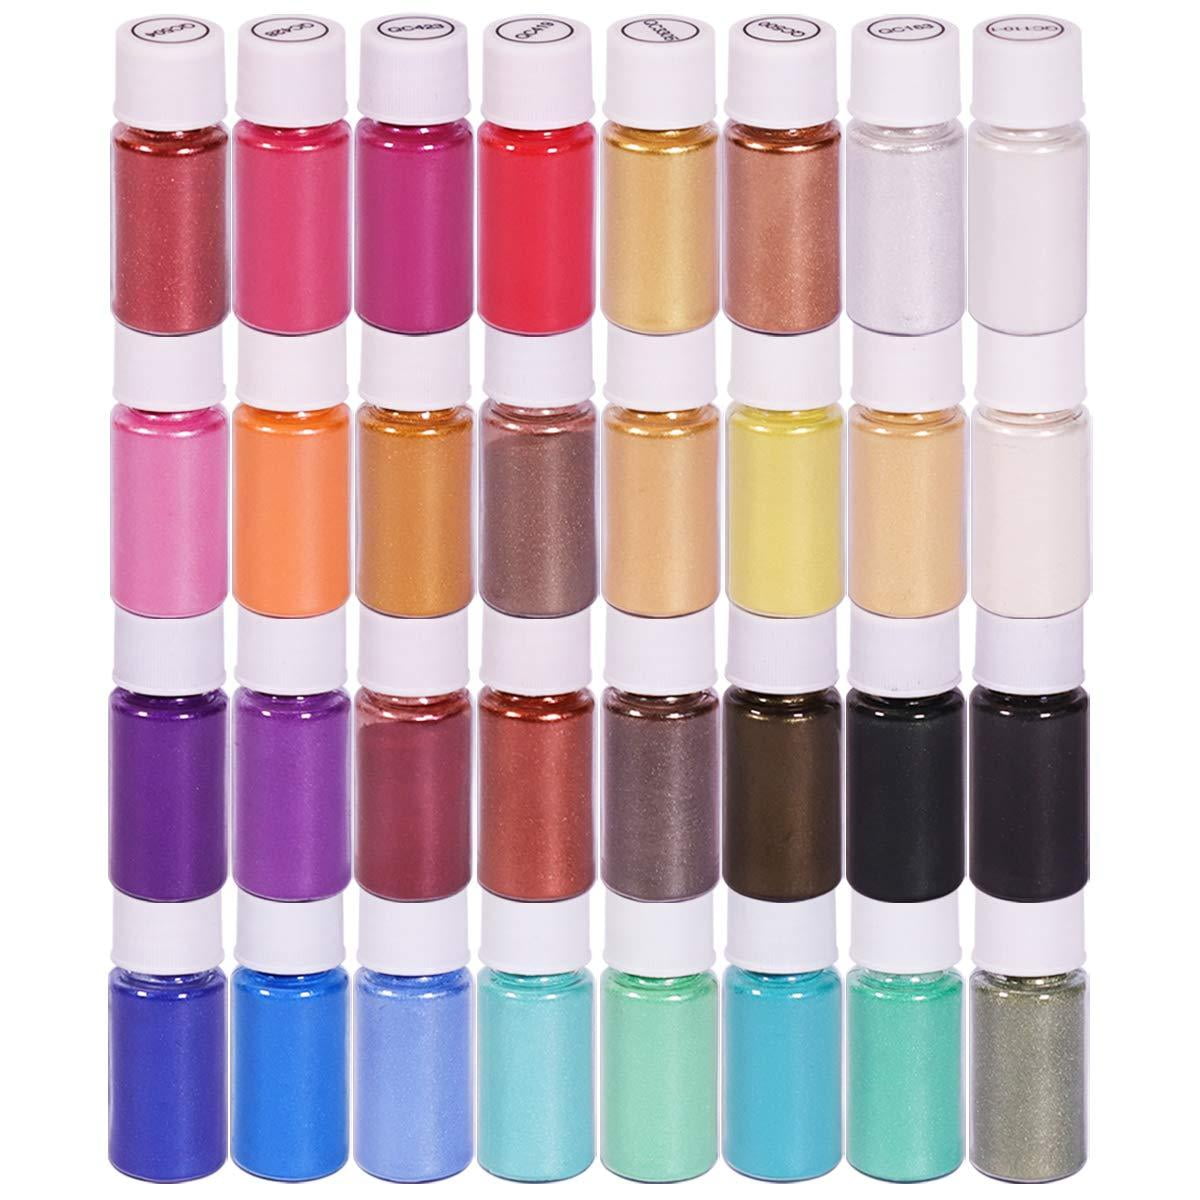 Mica Powder 32 Pearlescent Pigments Set, for Lip Gloss, Makeup, Soap, Bath  Bomb Dye, Nail Polish, Painting, Epoxy Resin, Craft Projects